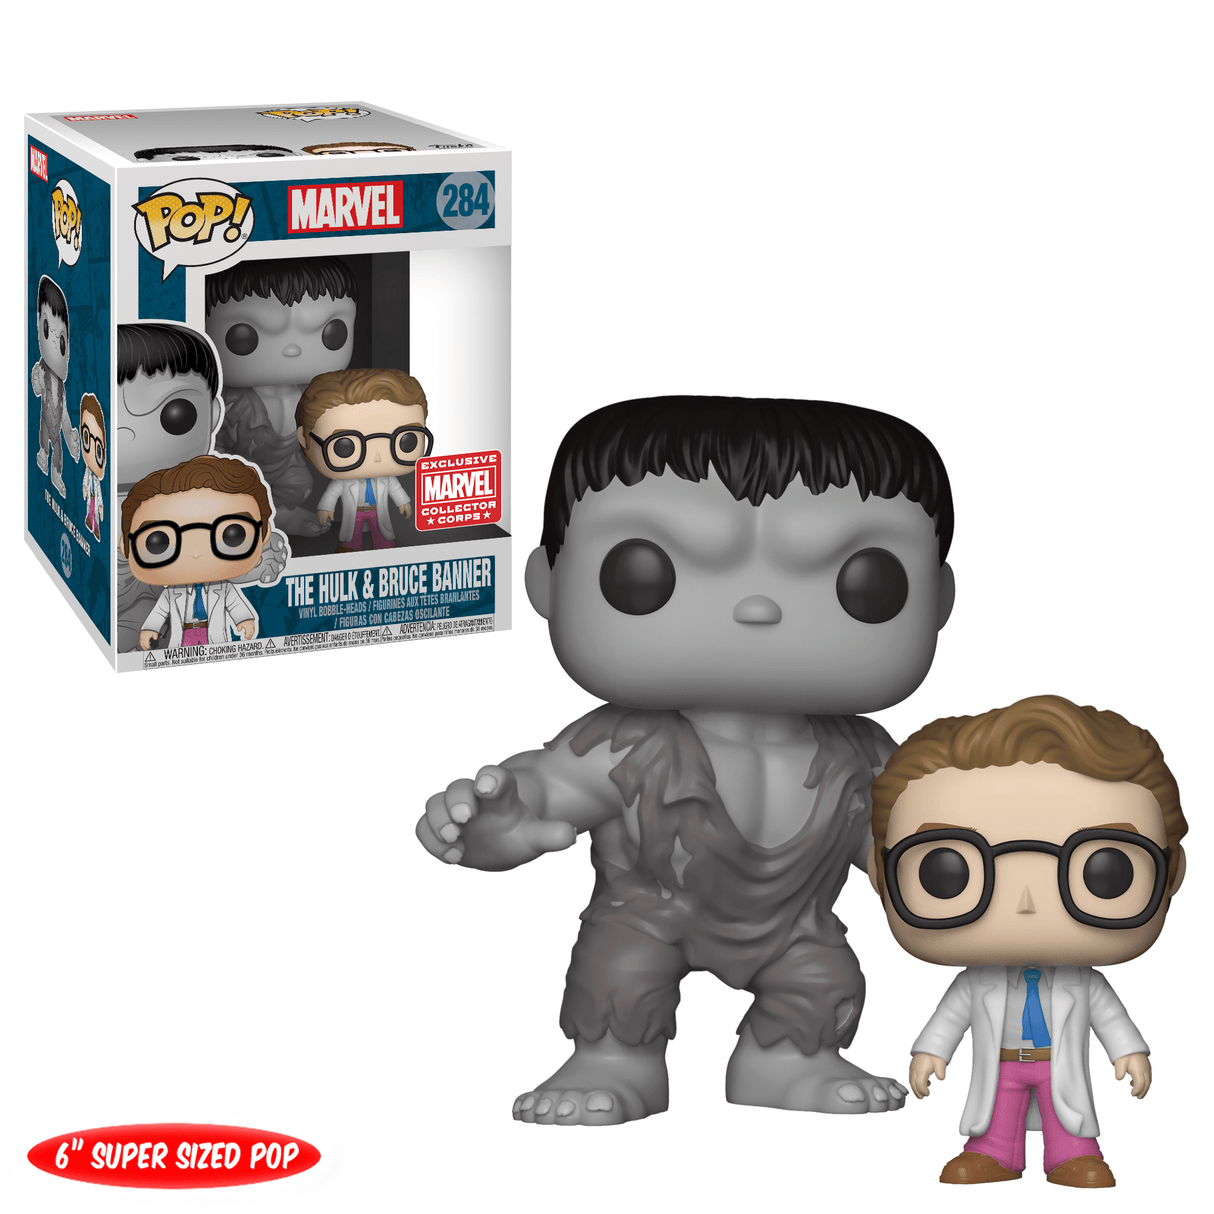 Funko Pop Marvel - The Hulk and Bruce Banner 6" - Exclusive Marvel Collector Corps #284 (4868489281636)